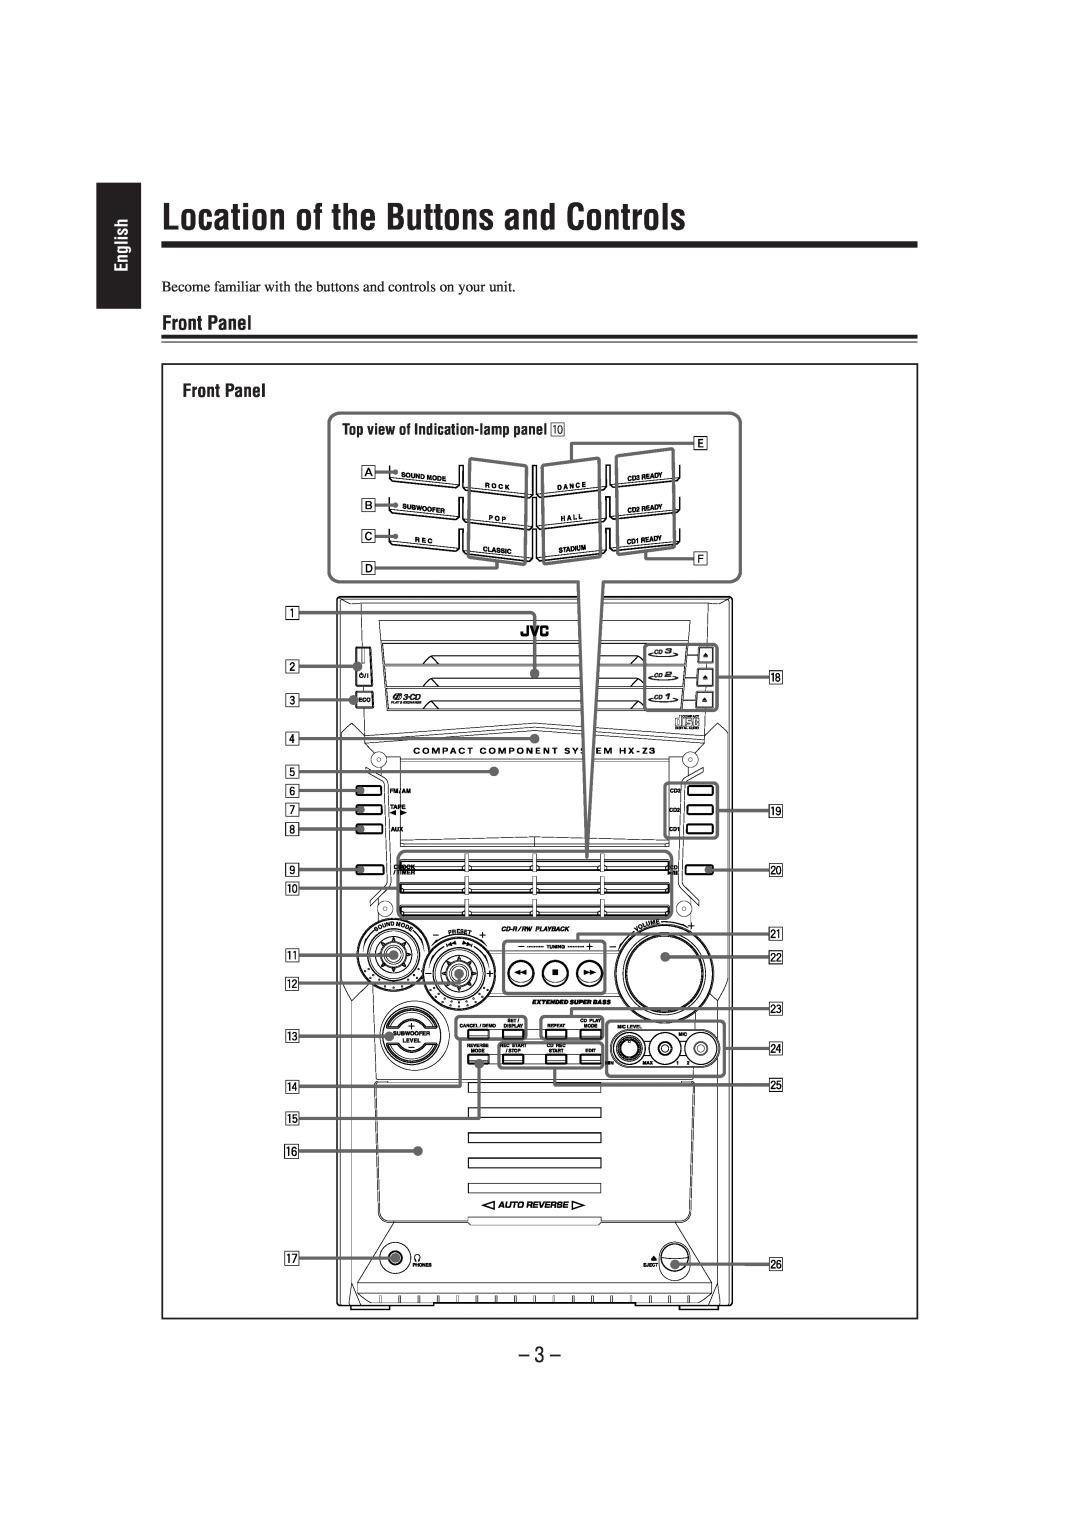 JVC CA-HXZ3 manual Location of the Buttons and Controls, Front Panel, English, Mode, Lume O, Eset, Compact Digital Audio 